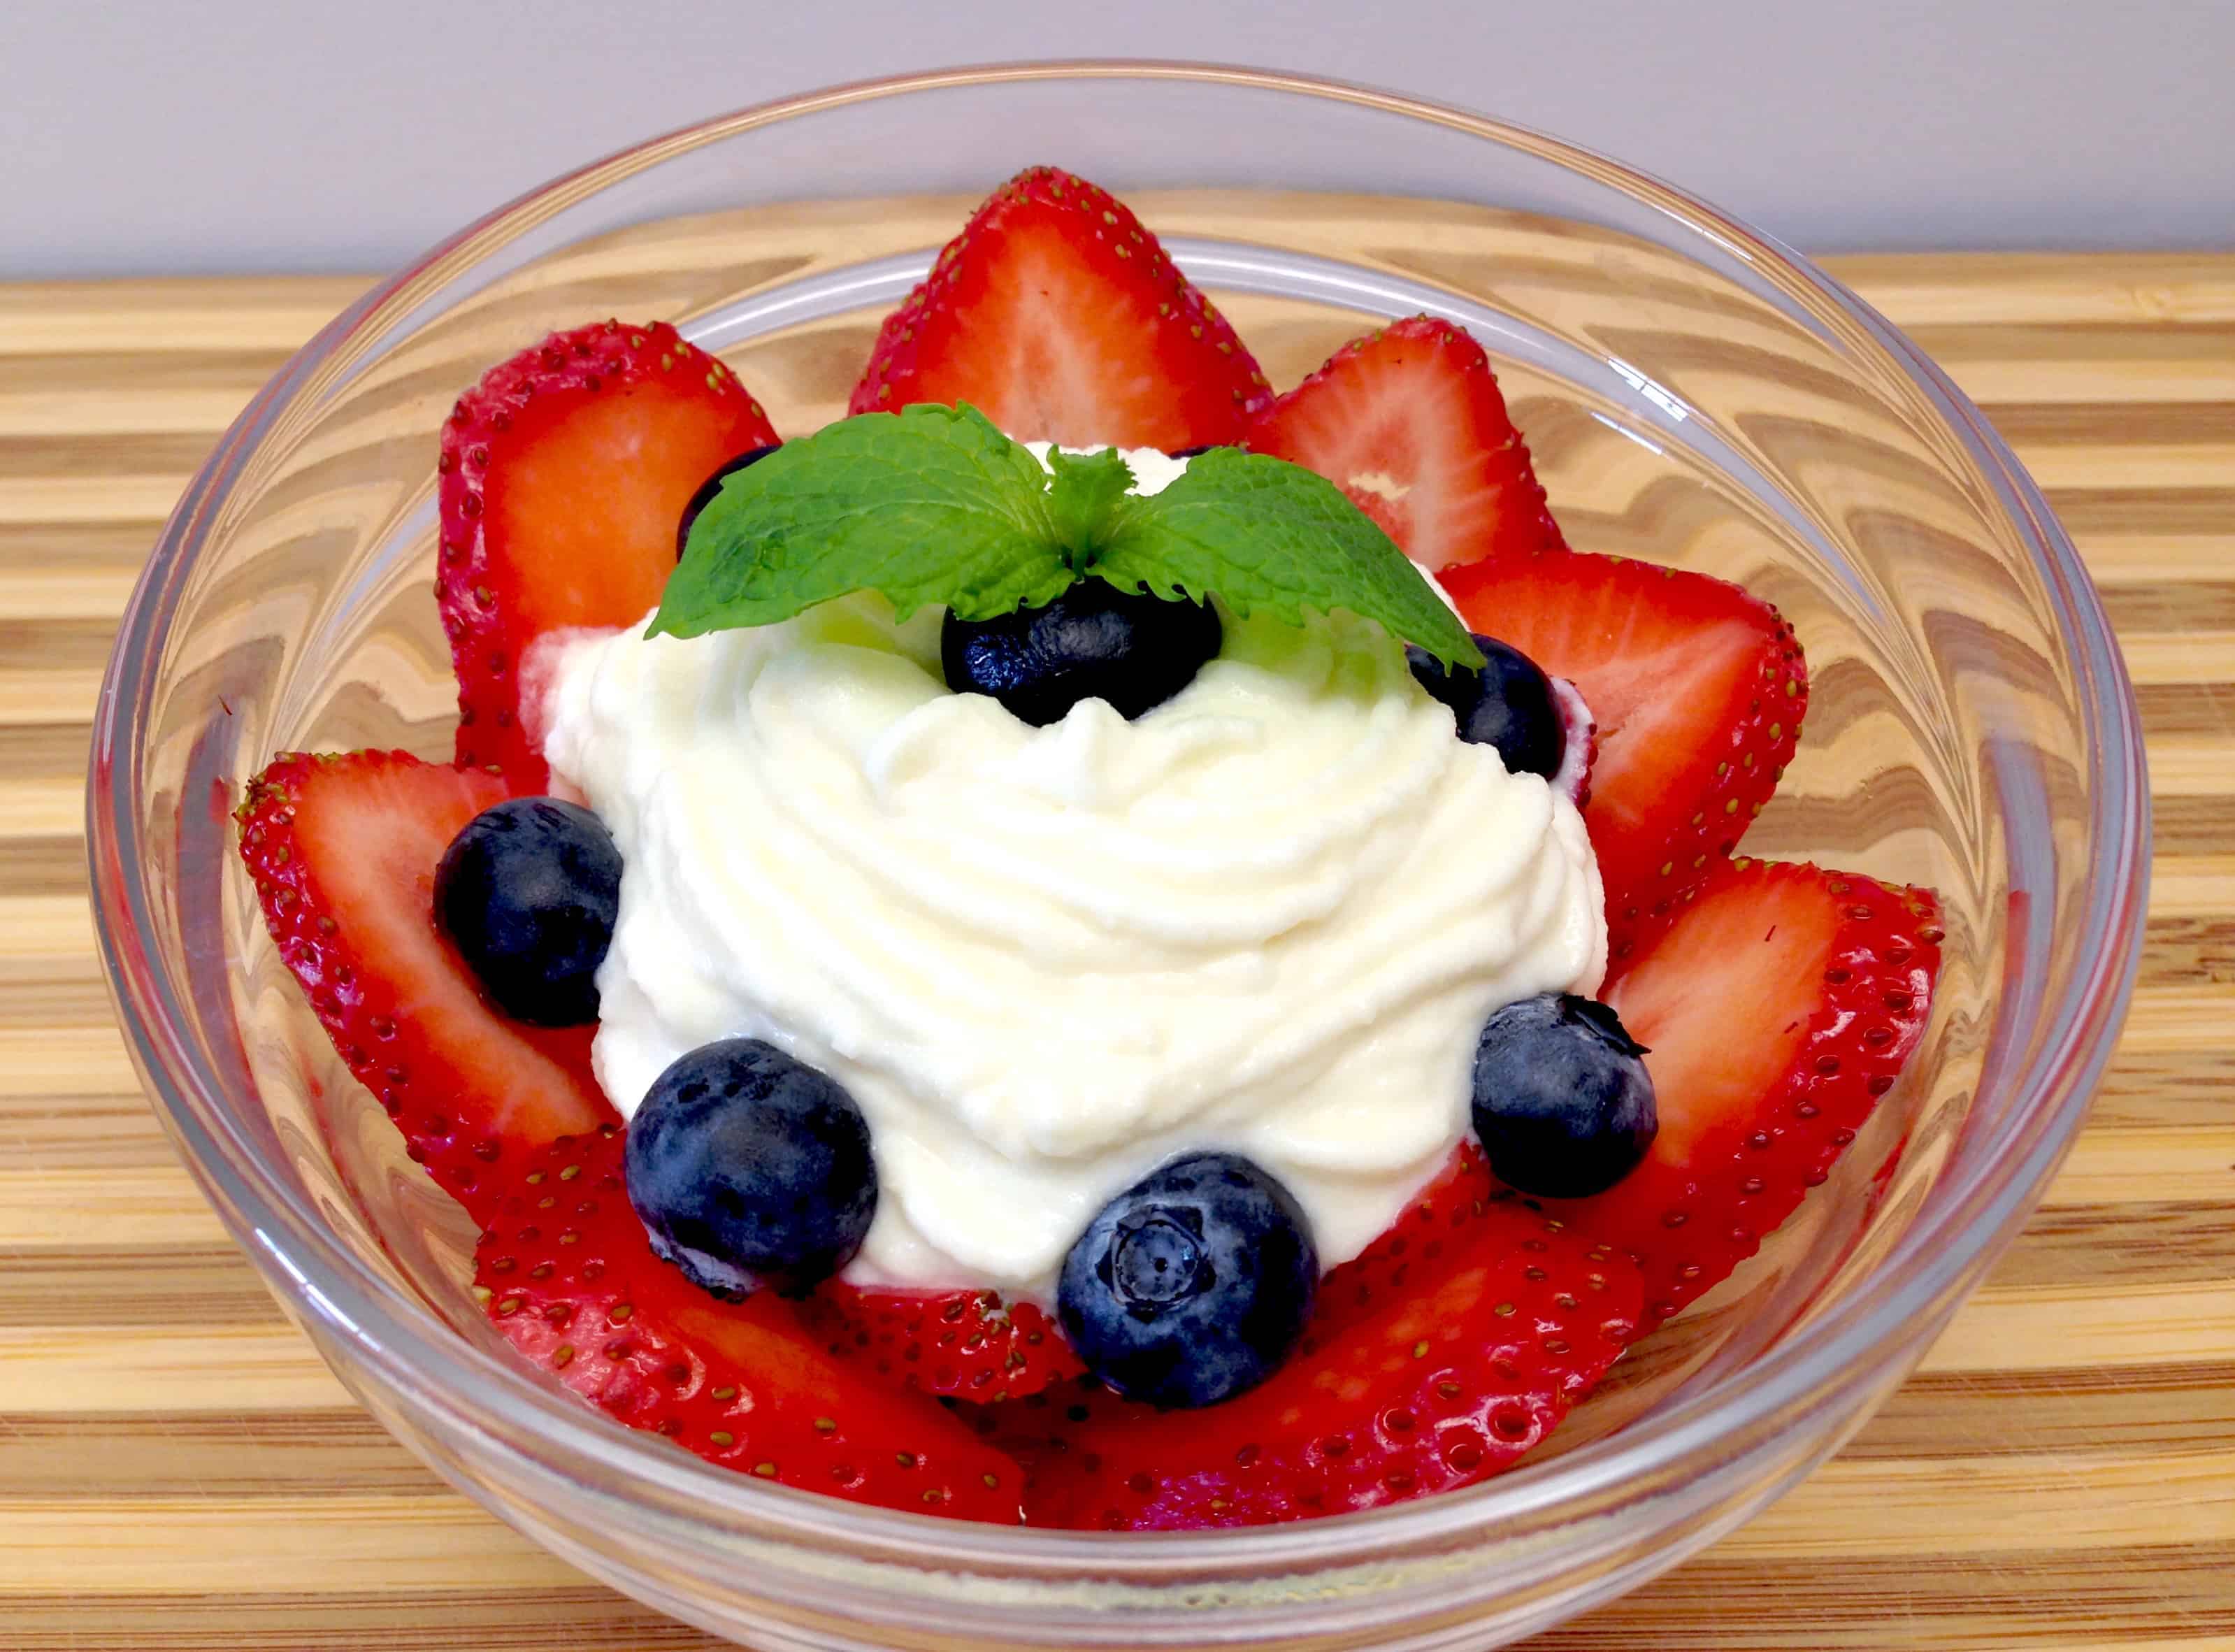 Berries & Cream 2 Minute Dessert - Keto and Low Carb